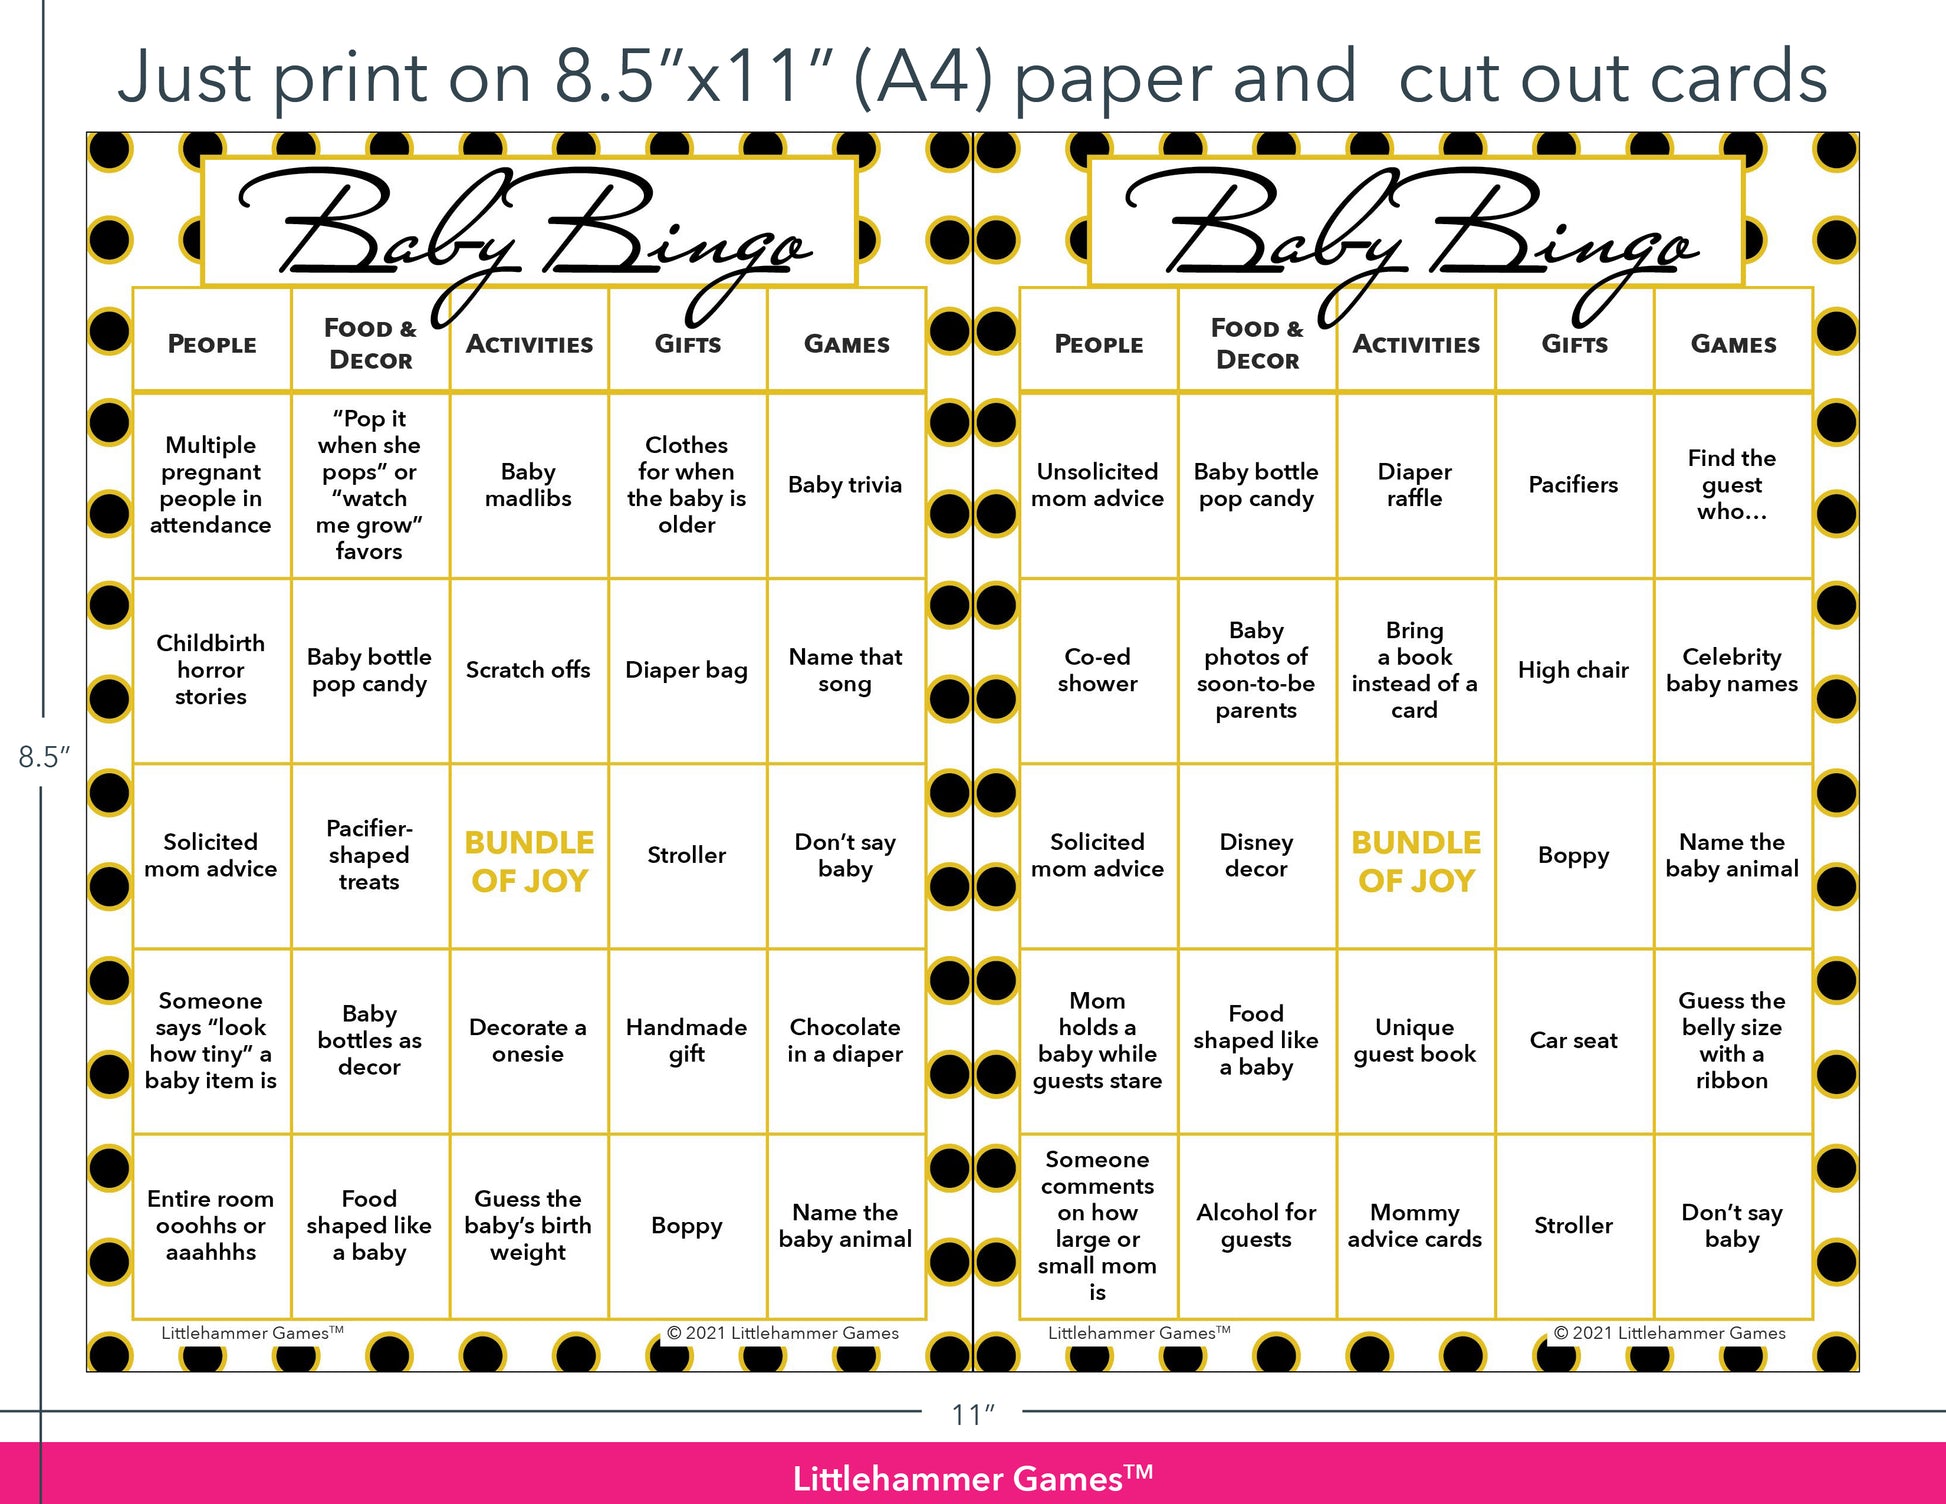 Black and gold polka dot Baby Bingo game cards with printing instructions